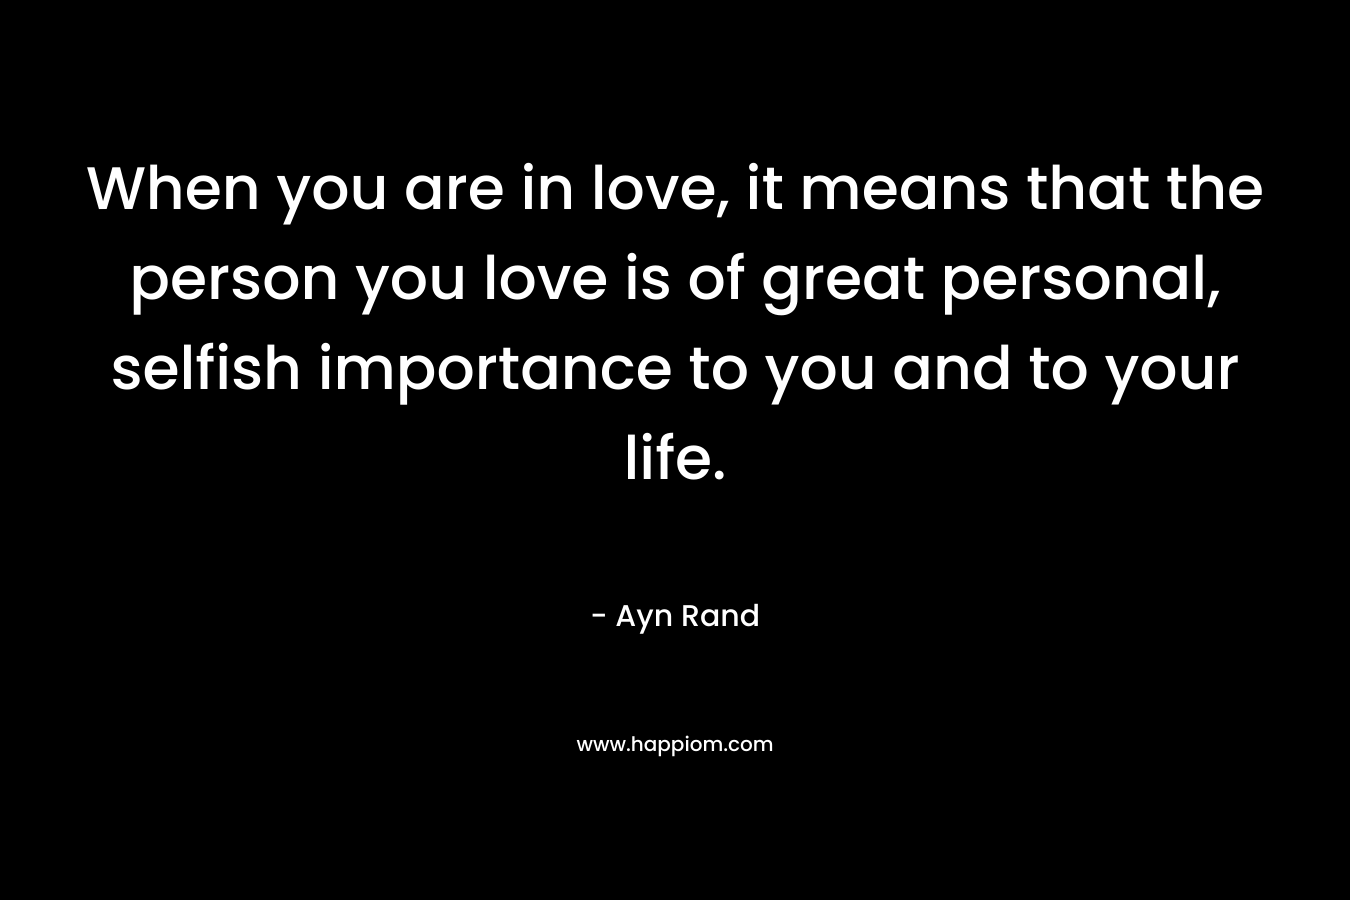 When you are in love, it means that the person you love is of great personal, selfish importance to you and to your life.